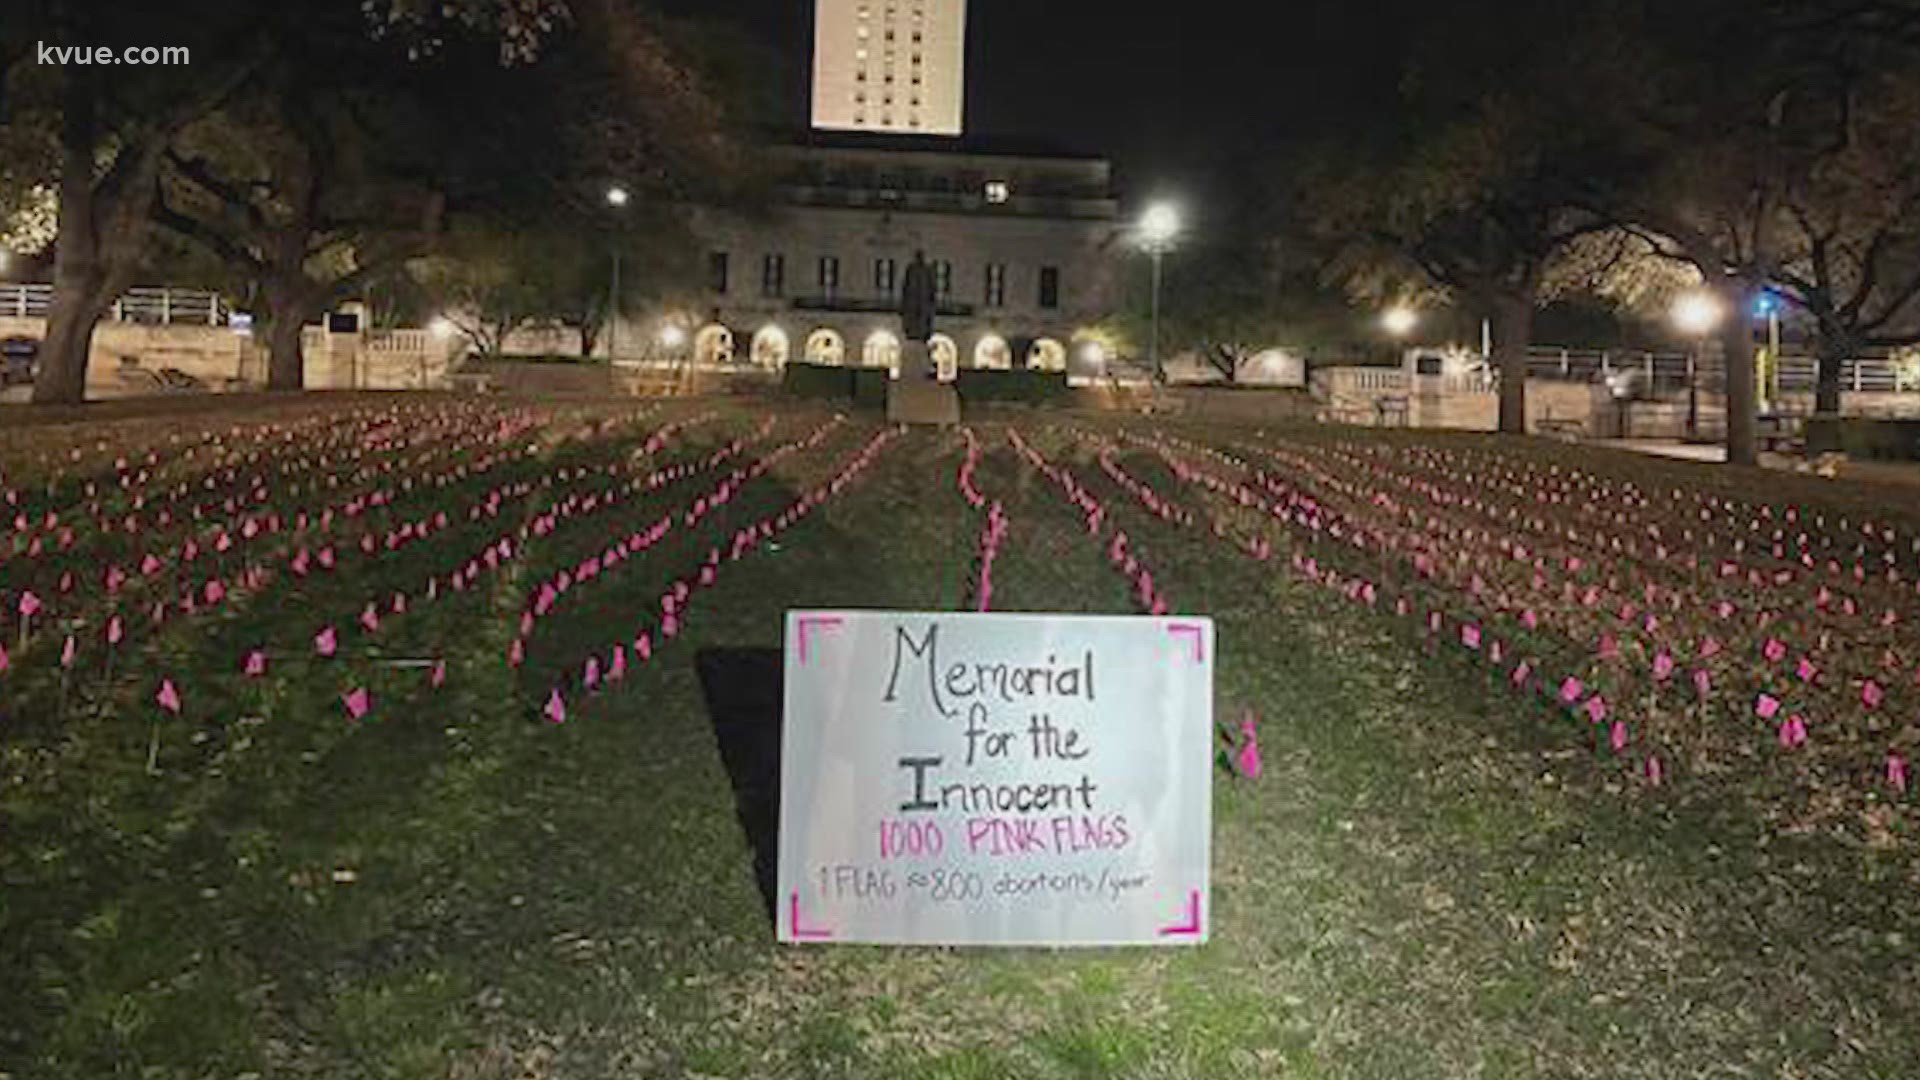 The Young Conservatives of Texas placed a thousand pink flags on the south lawn Tuesday, they say as a display of support for the lives lost to abortion.